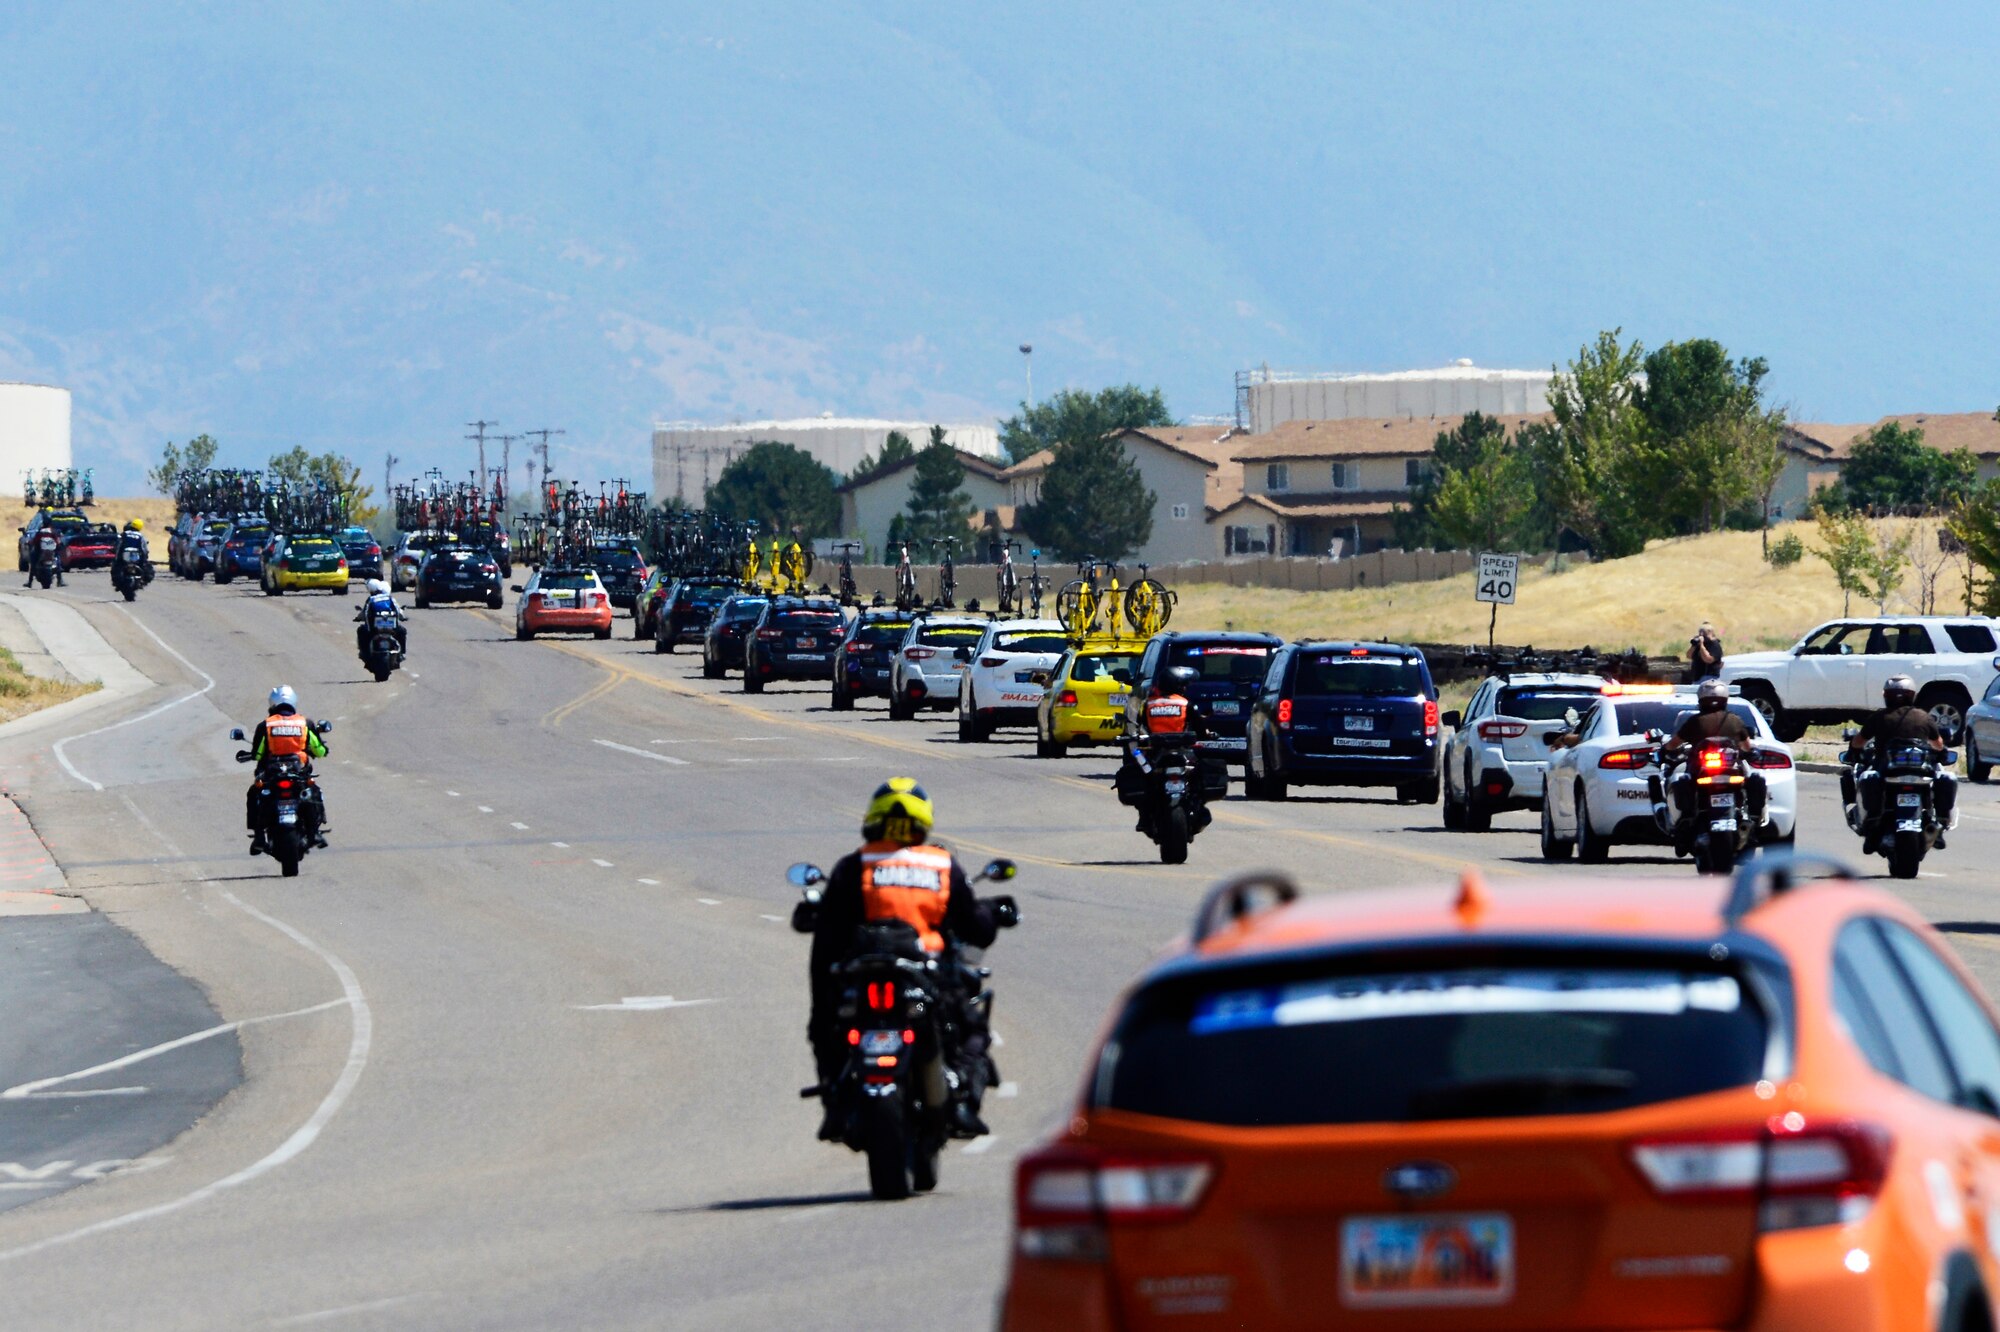 Support vehicles follow riders during stage 3 of the 2018 Tour of Utah road race Aug. 9, 2018, at Hill Air Force Base, Utah. The Tour of Utah is one of the top professional cycling events in the country and showcases some of the world’s best teams and cyclists. Stage 3 of the multiday race took riders on a 116-mile route from Antelope Island to Layton and included a loop through the installation. (U.S. Air Force photo by David Perry)